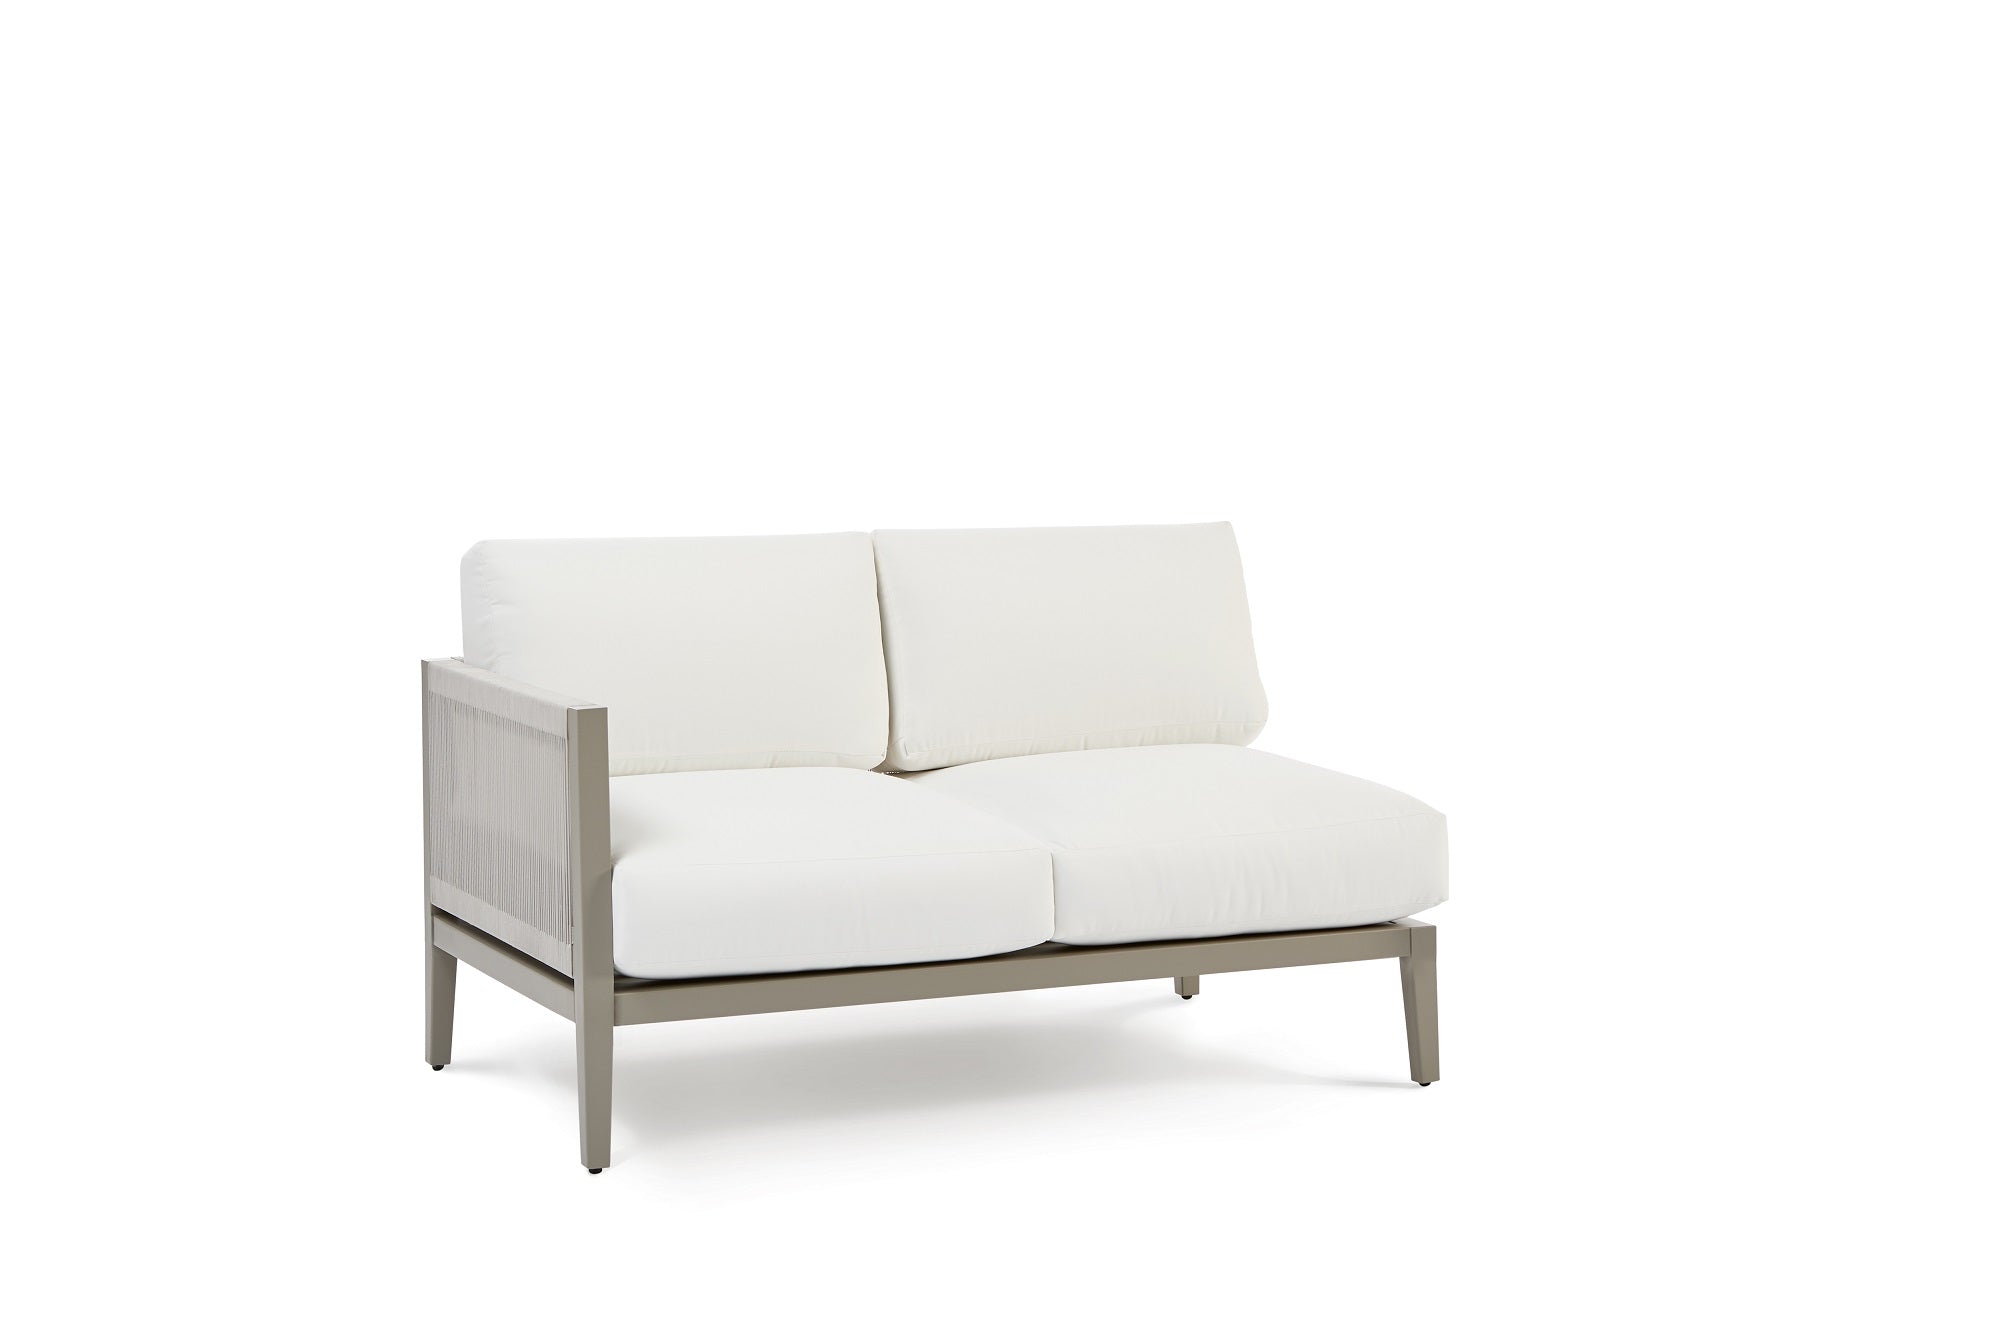 South Sea Outdoor Living Outdoor Sectional Component South Sea Rattan - Nicole Loveseat LSF - 72562